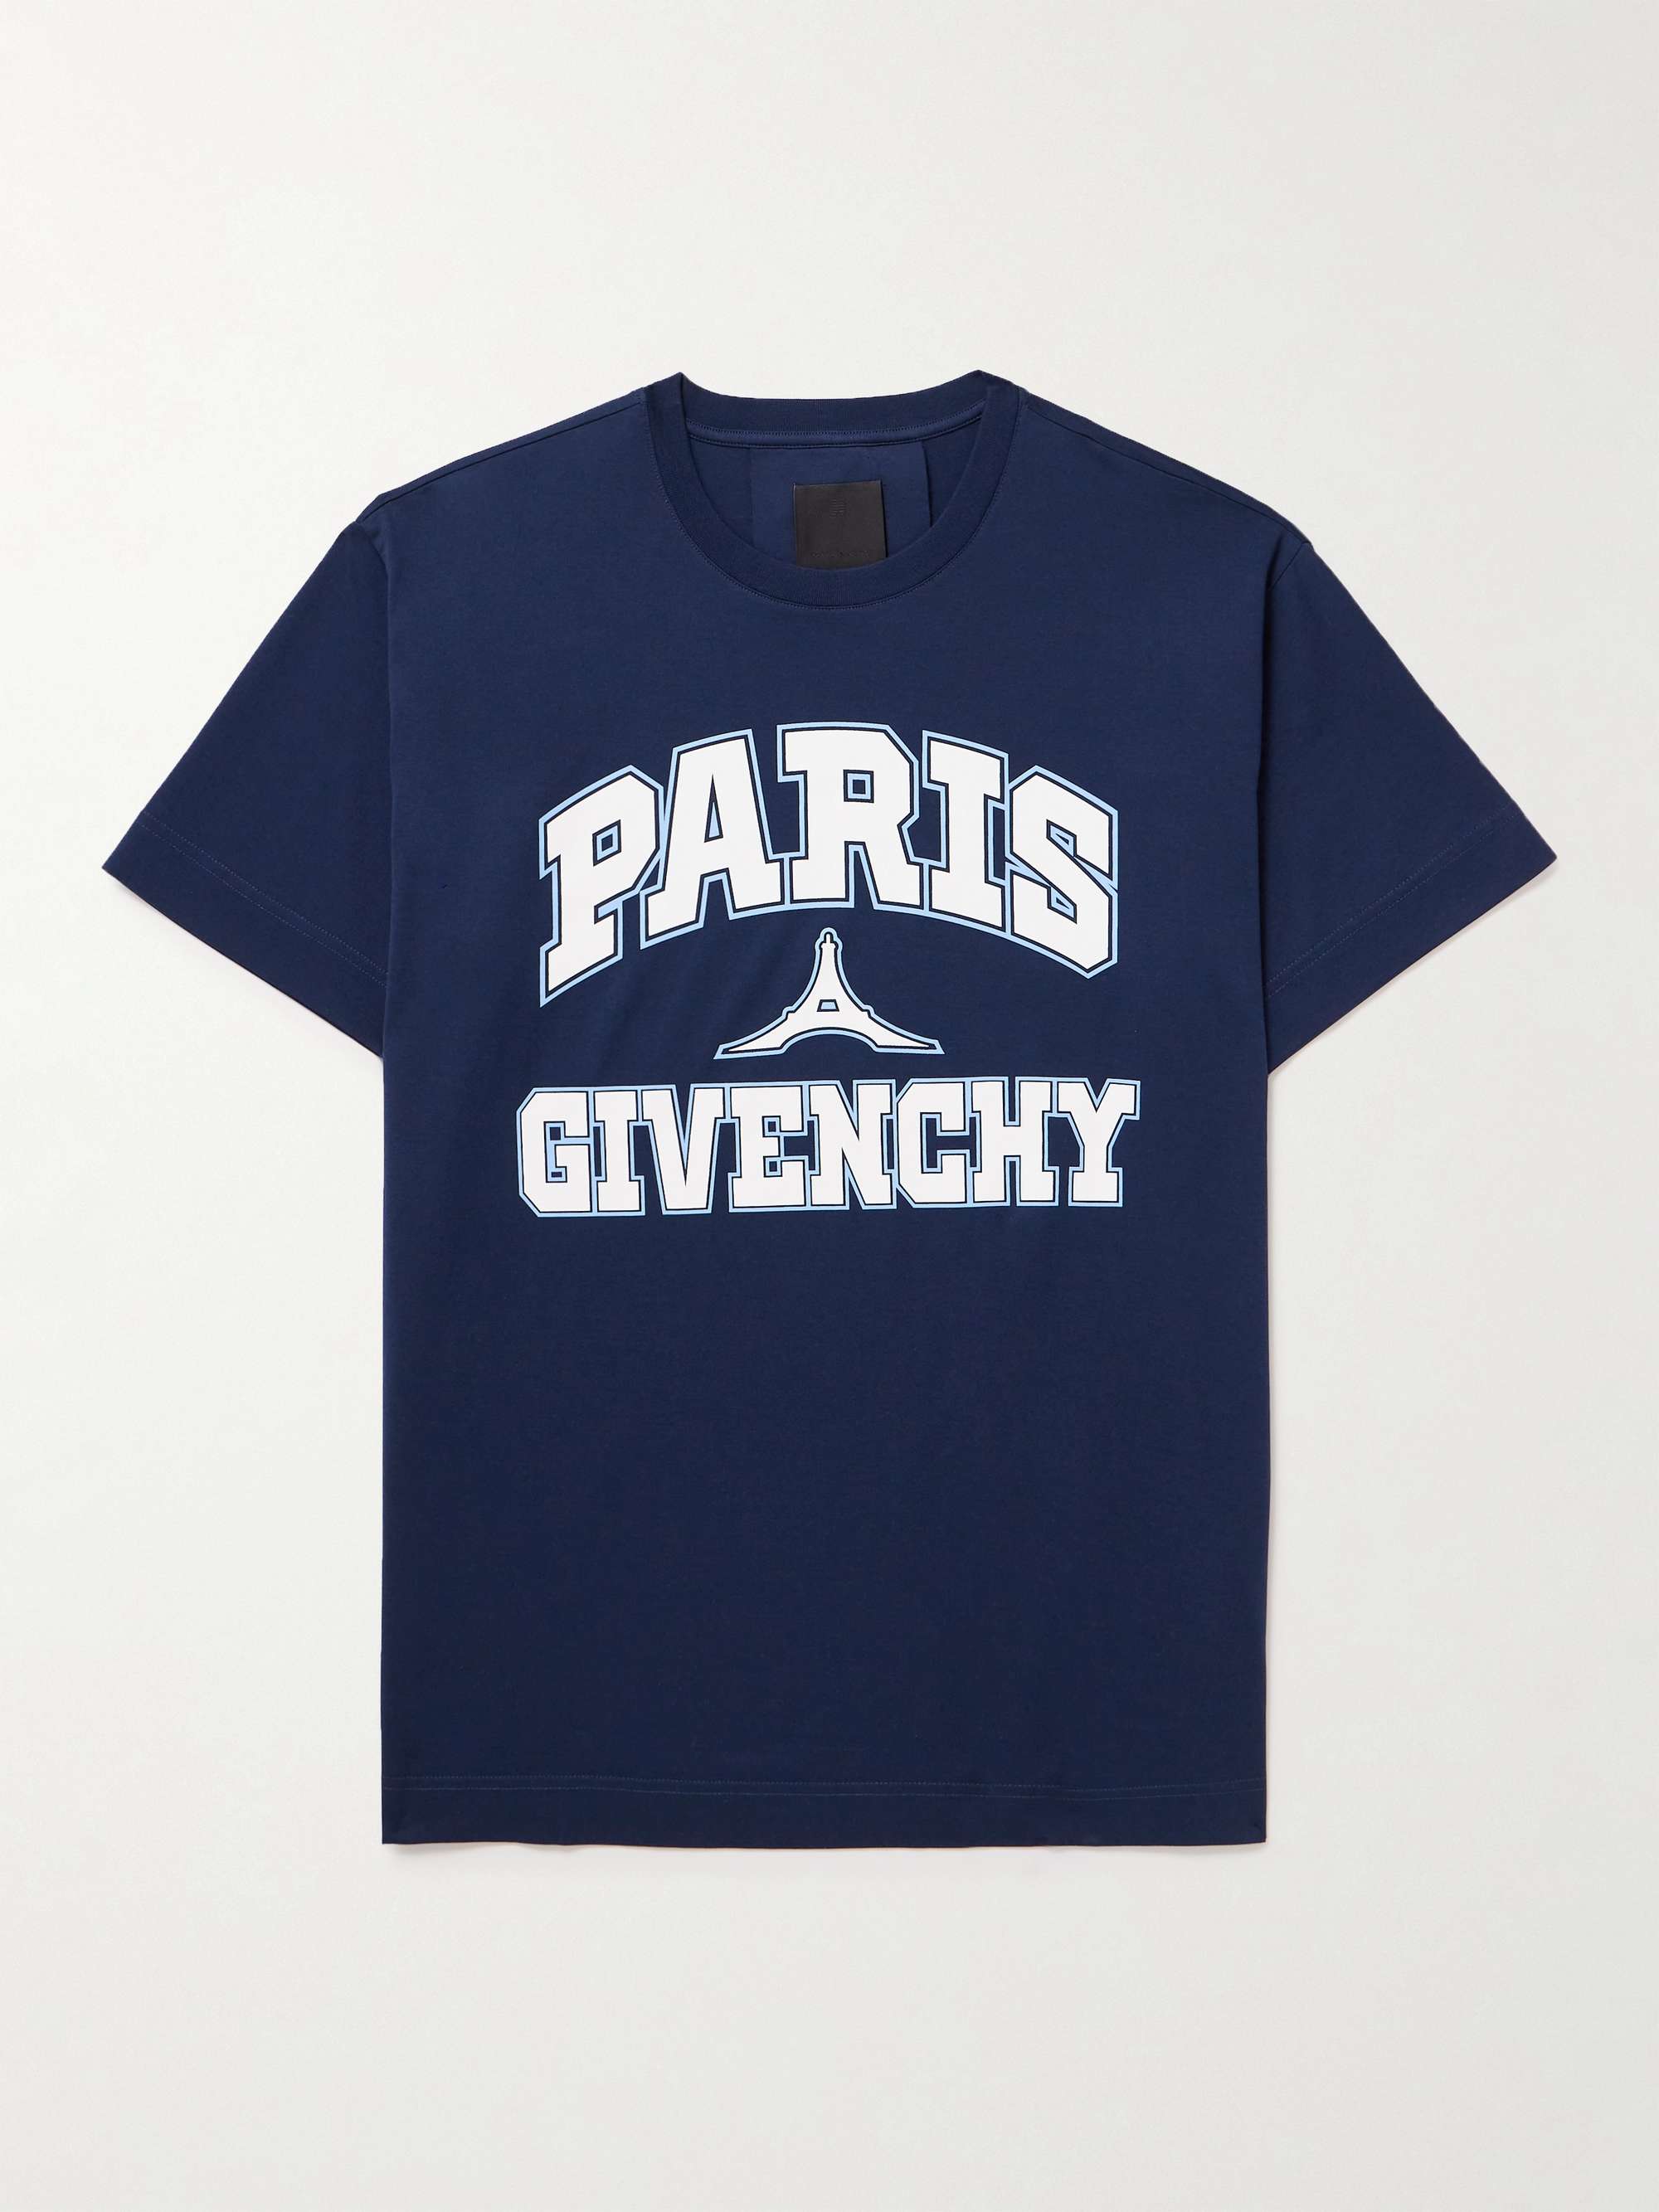 Logo cotton jersey T-shirt in black - Givenchy